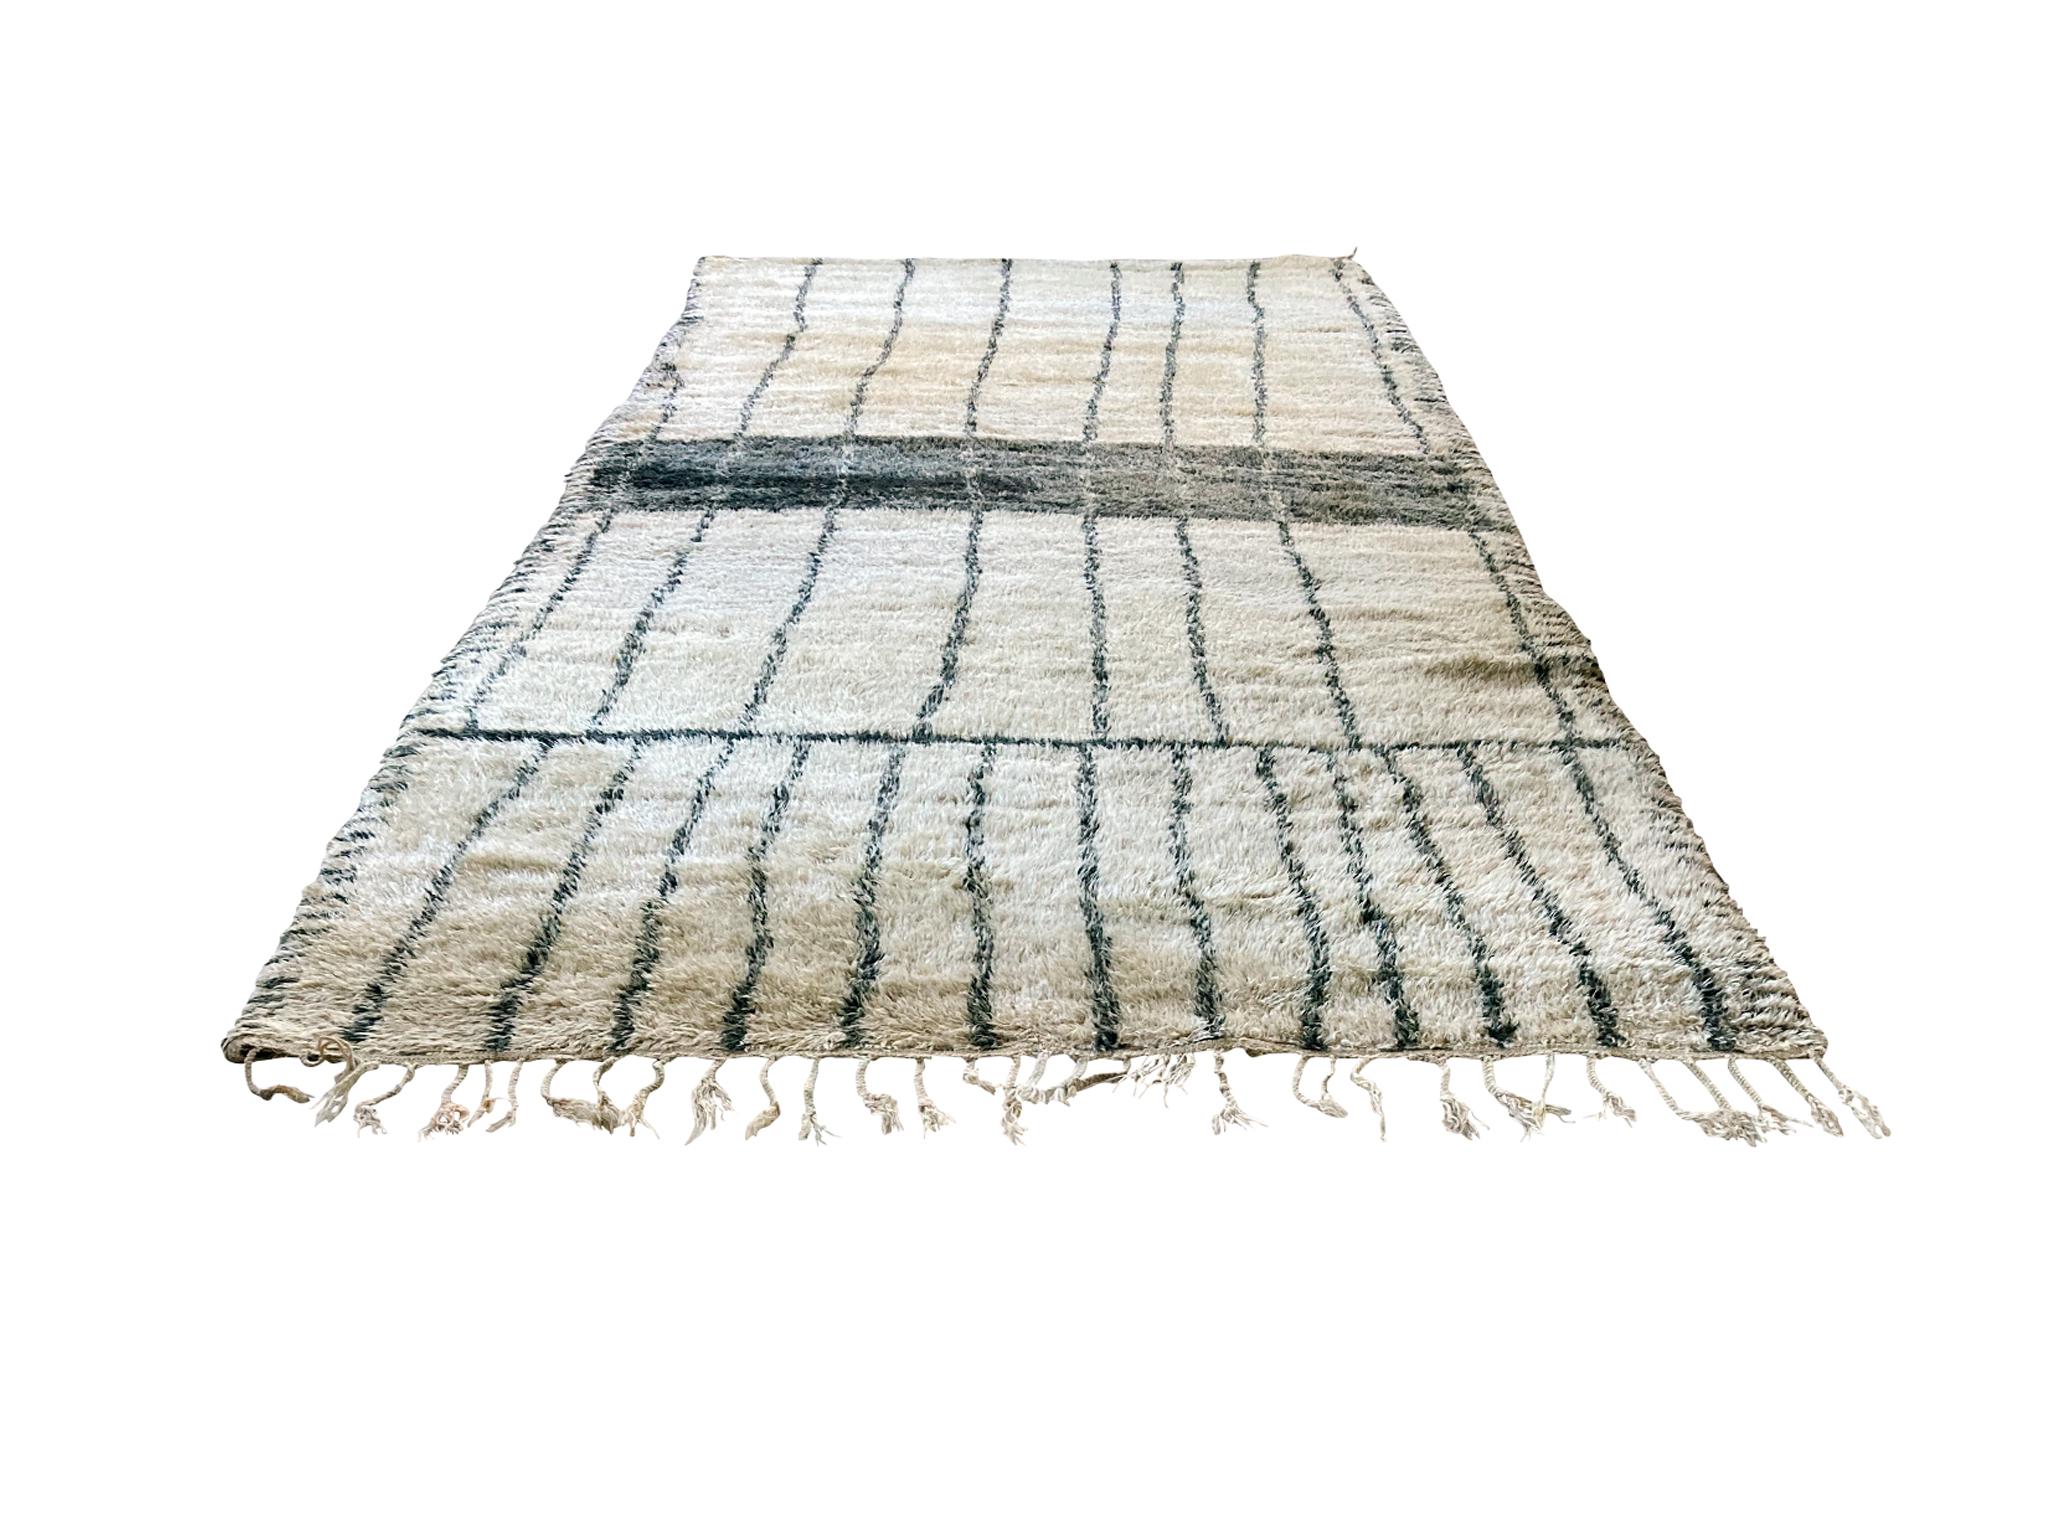 This large Moroccan Beni Ourain rug was hand-knotted in the Mid-20th Century. Its design features bold black stripes that run the length of the rug. The rug is newly cleaned.

Dimensions:
6' 2